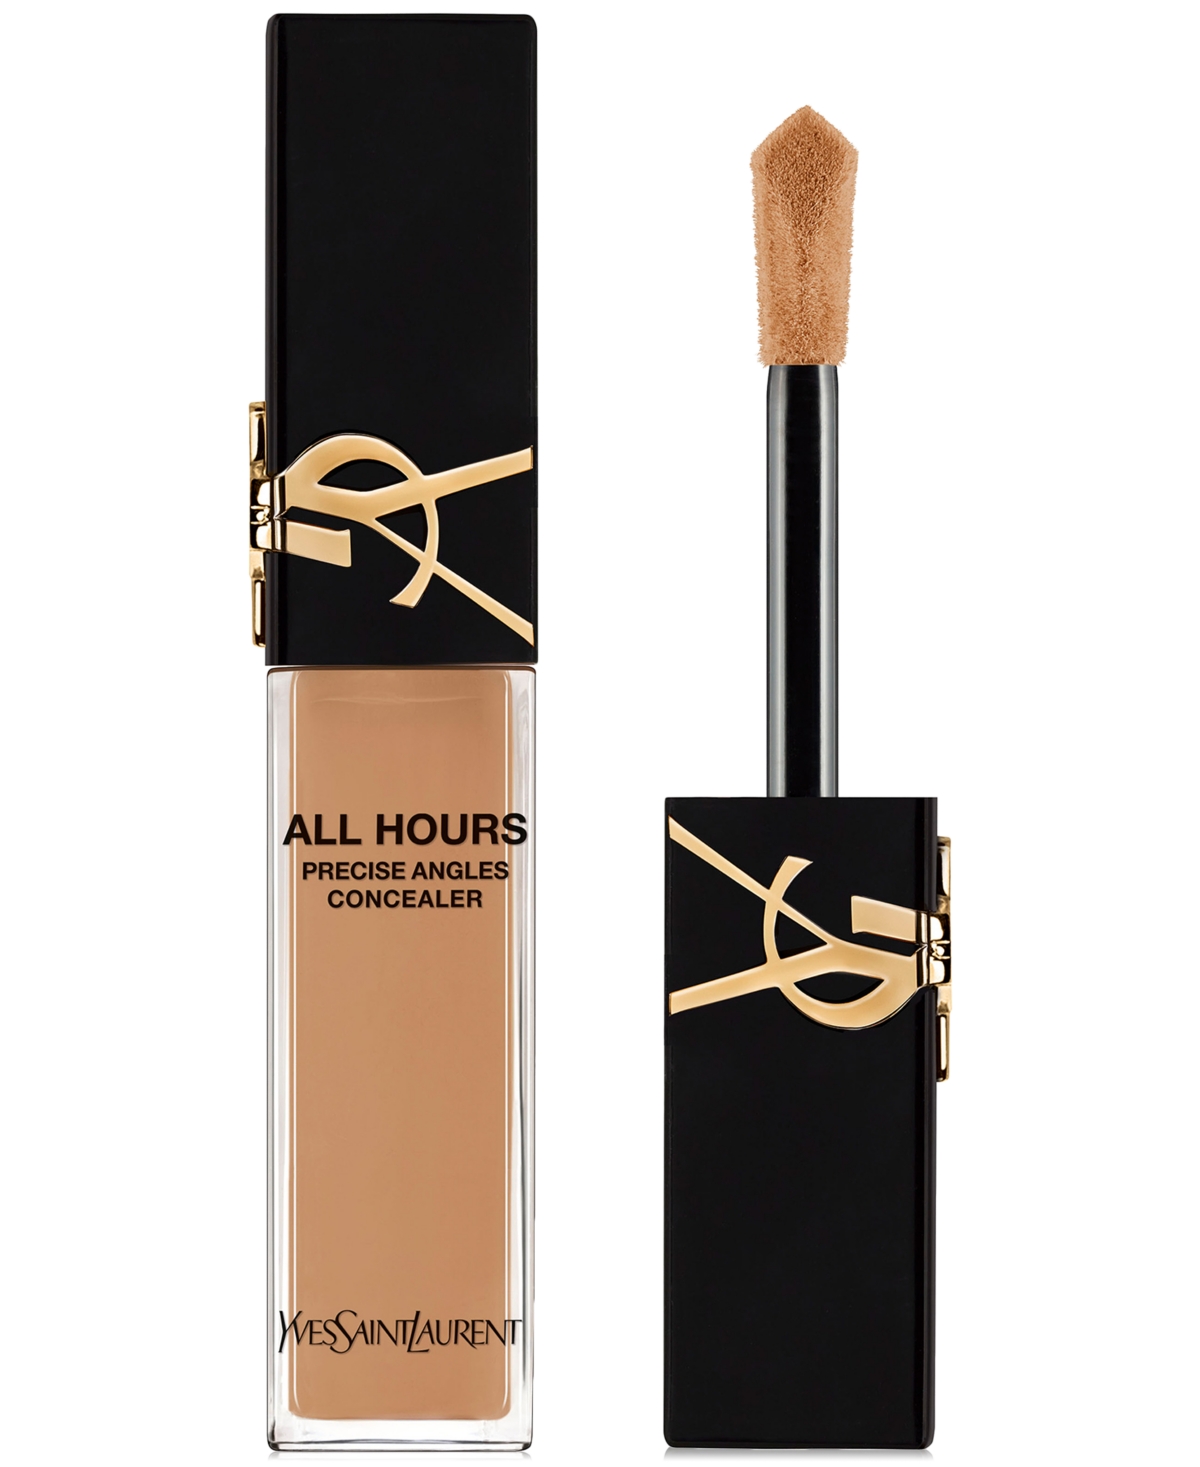 Saint Laurent All Hours Precise Angles Full-coverage Concealer In Medium Shade With Neutral Undertones